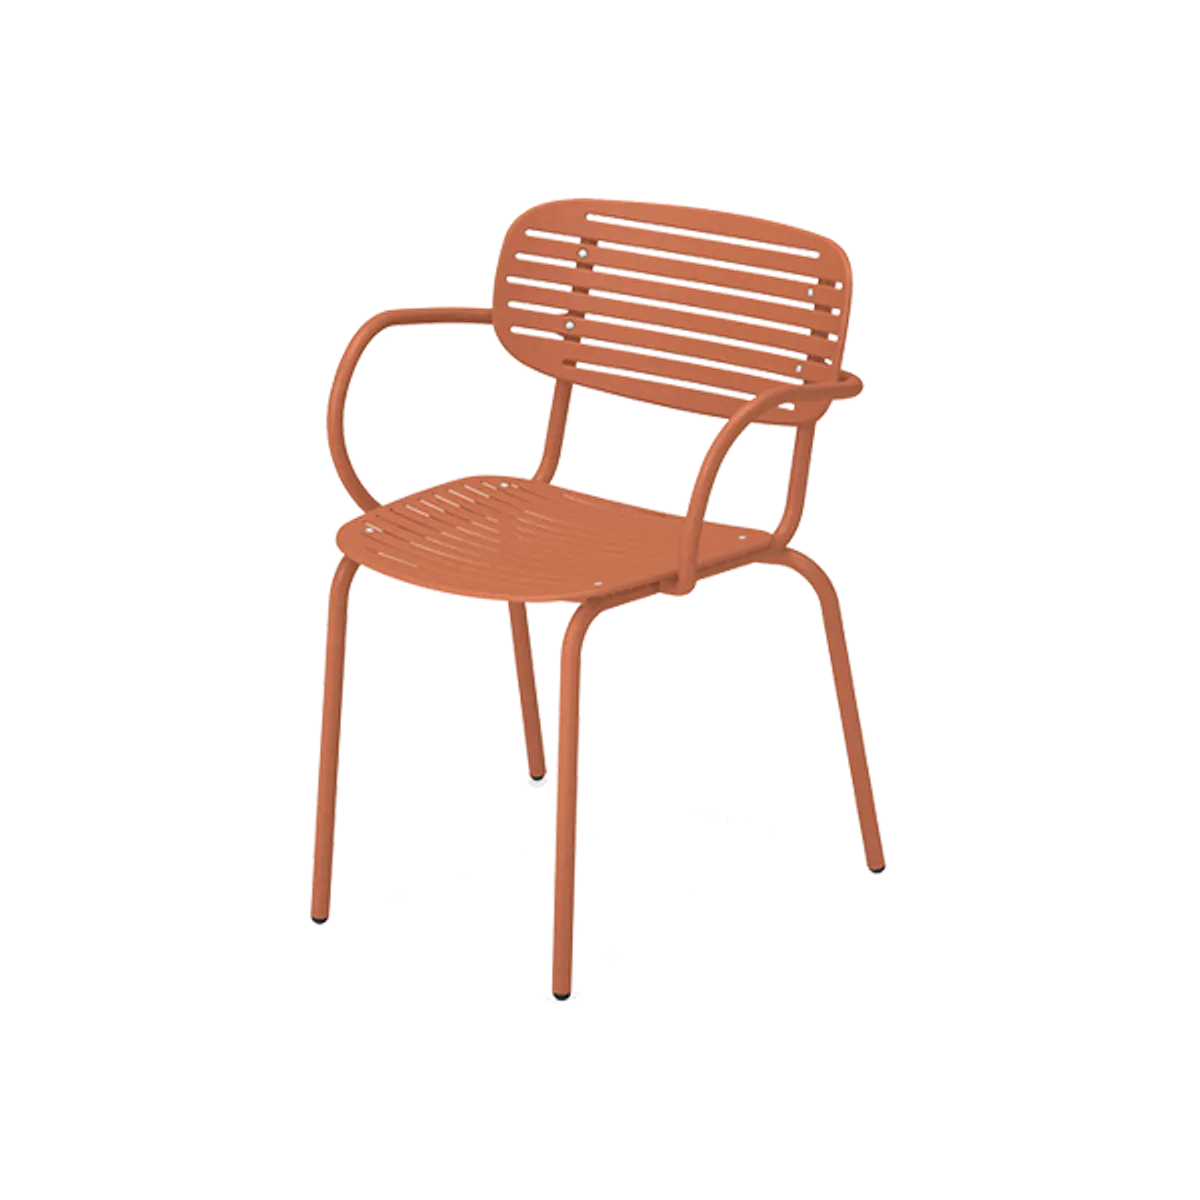 Web Mom Armchair In Orange Metal Furniture For Outdoors